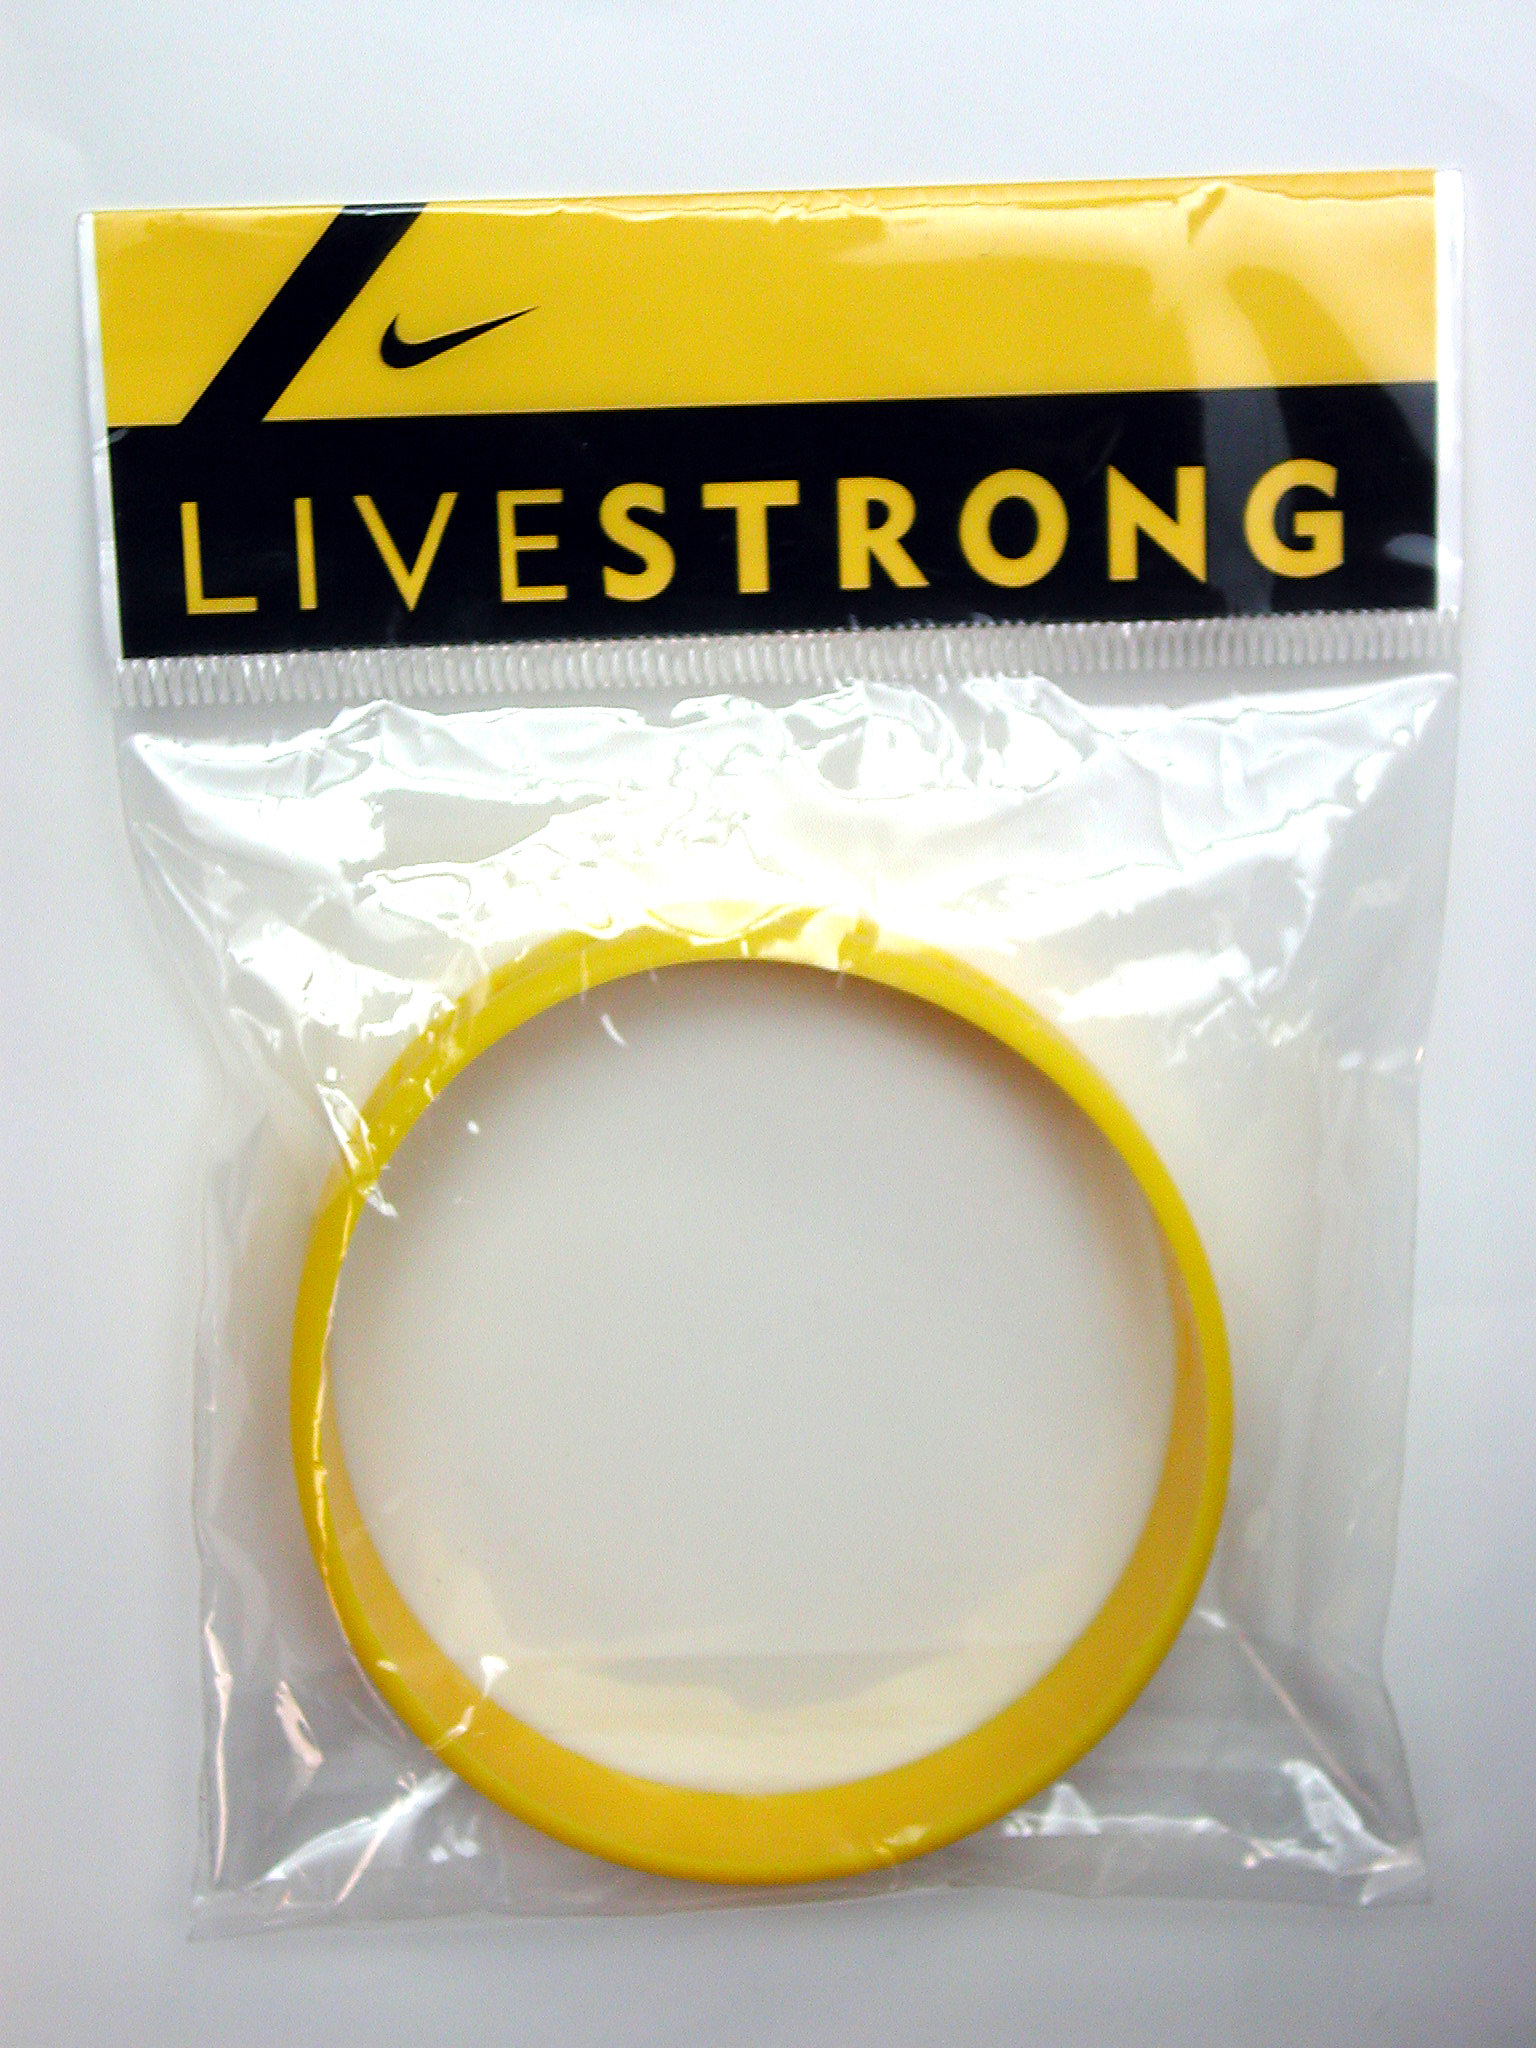 A LiveStrong bracelet in the clear package. 